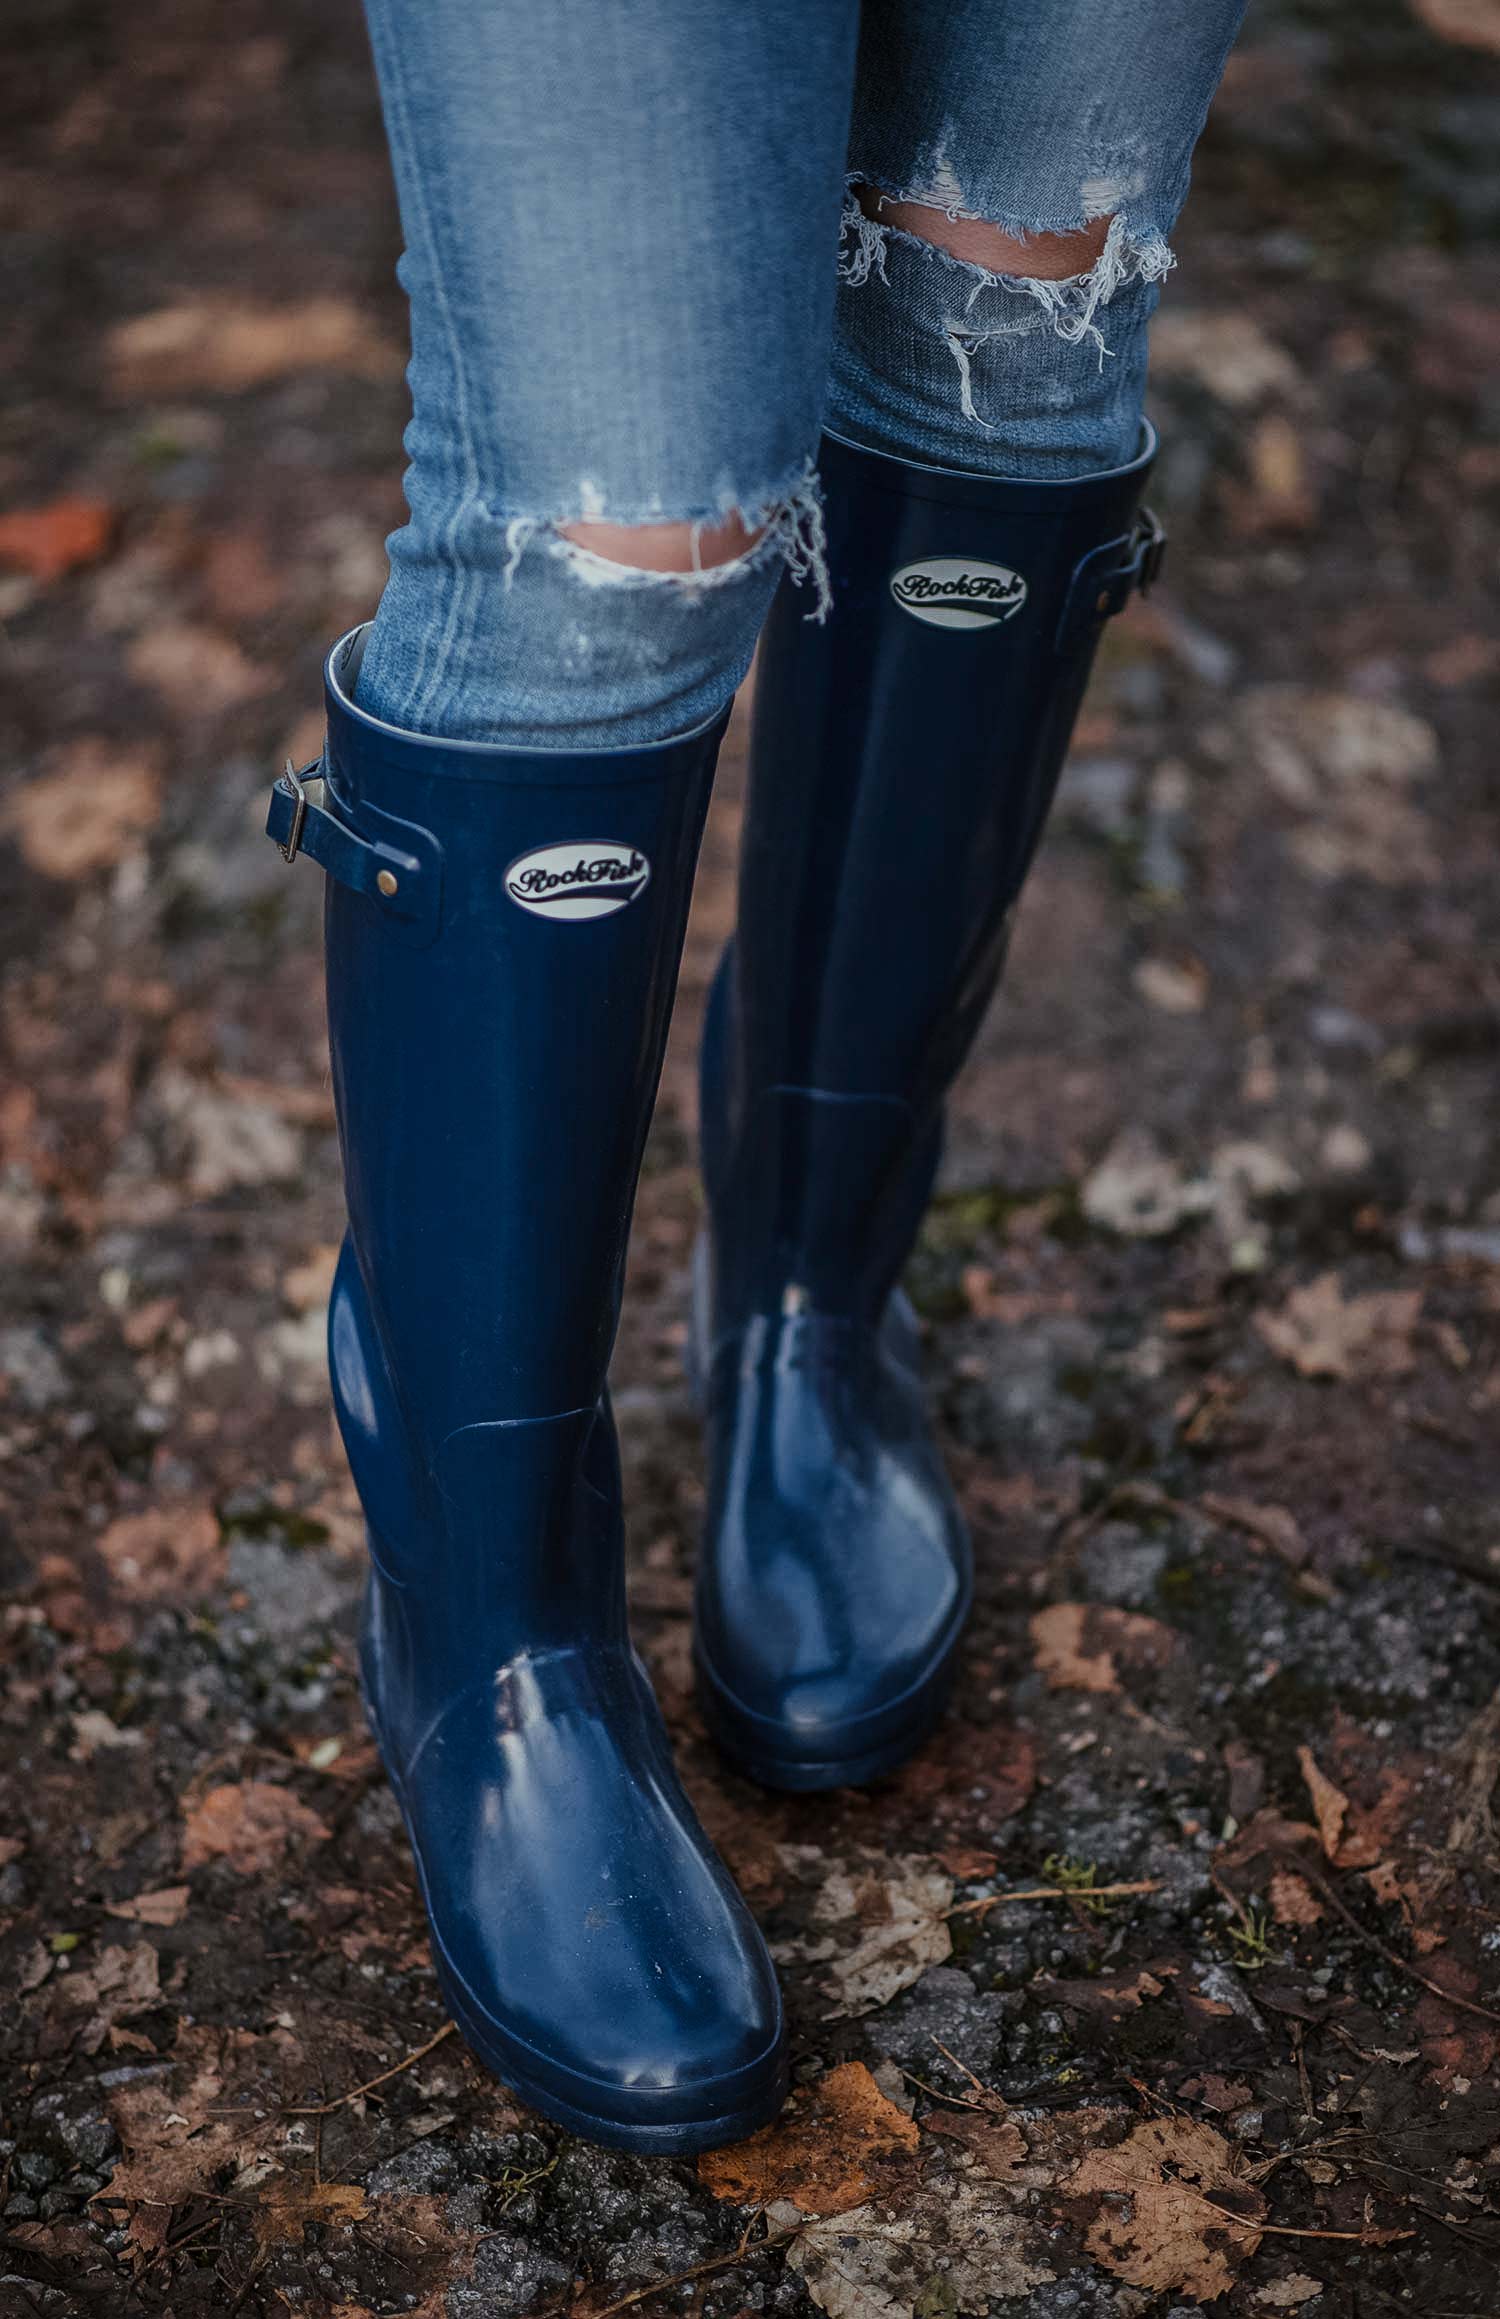 Navy Wellies And White Stripes – FORD LA FEMME